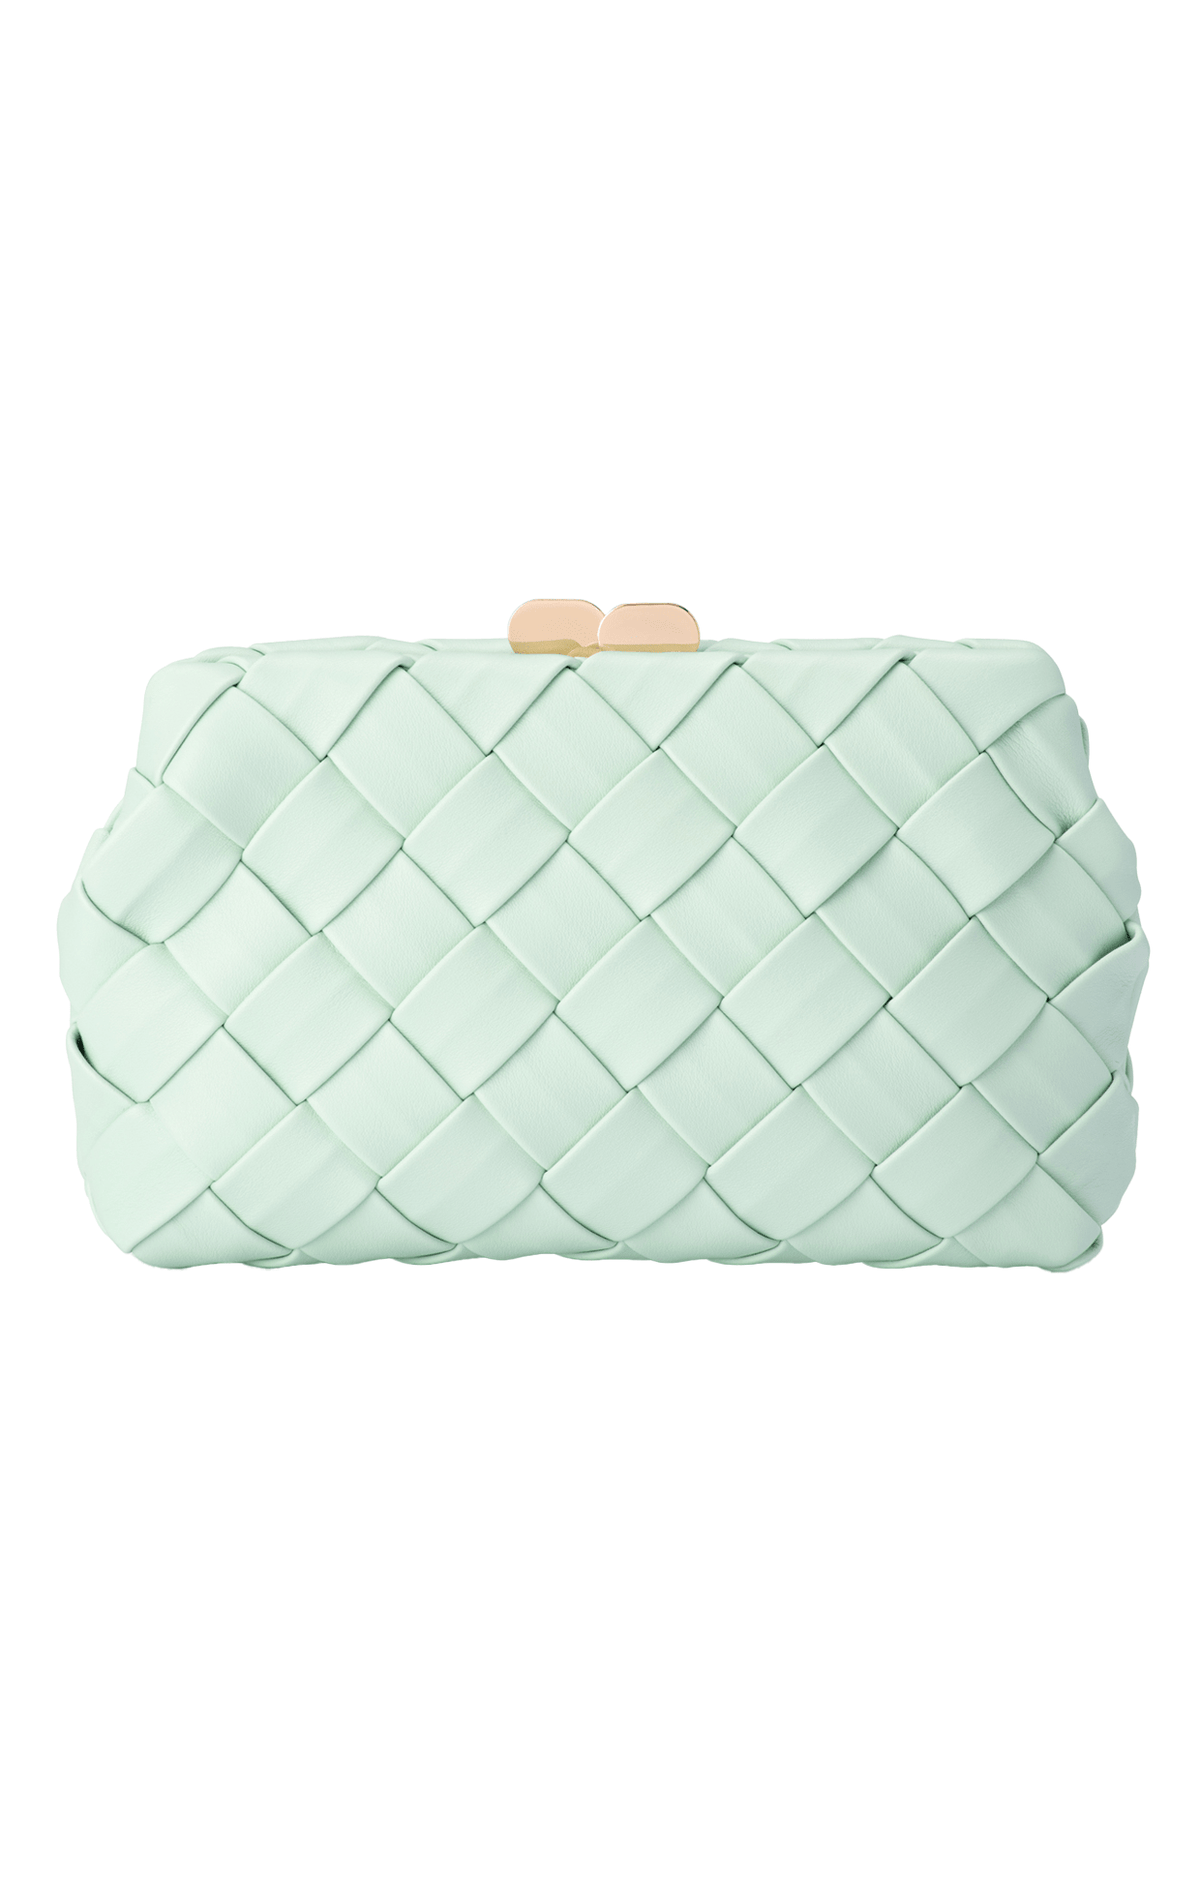 Multi Occasion OS / GREEN QUINN WOVEN CLUTCH IN MINT